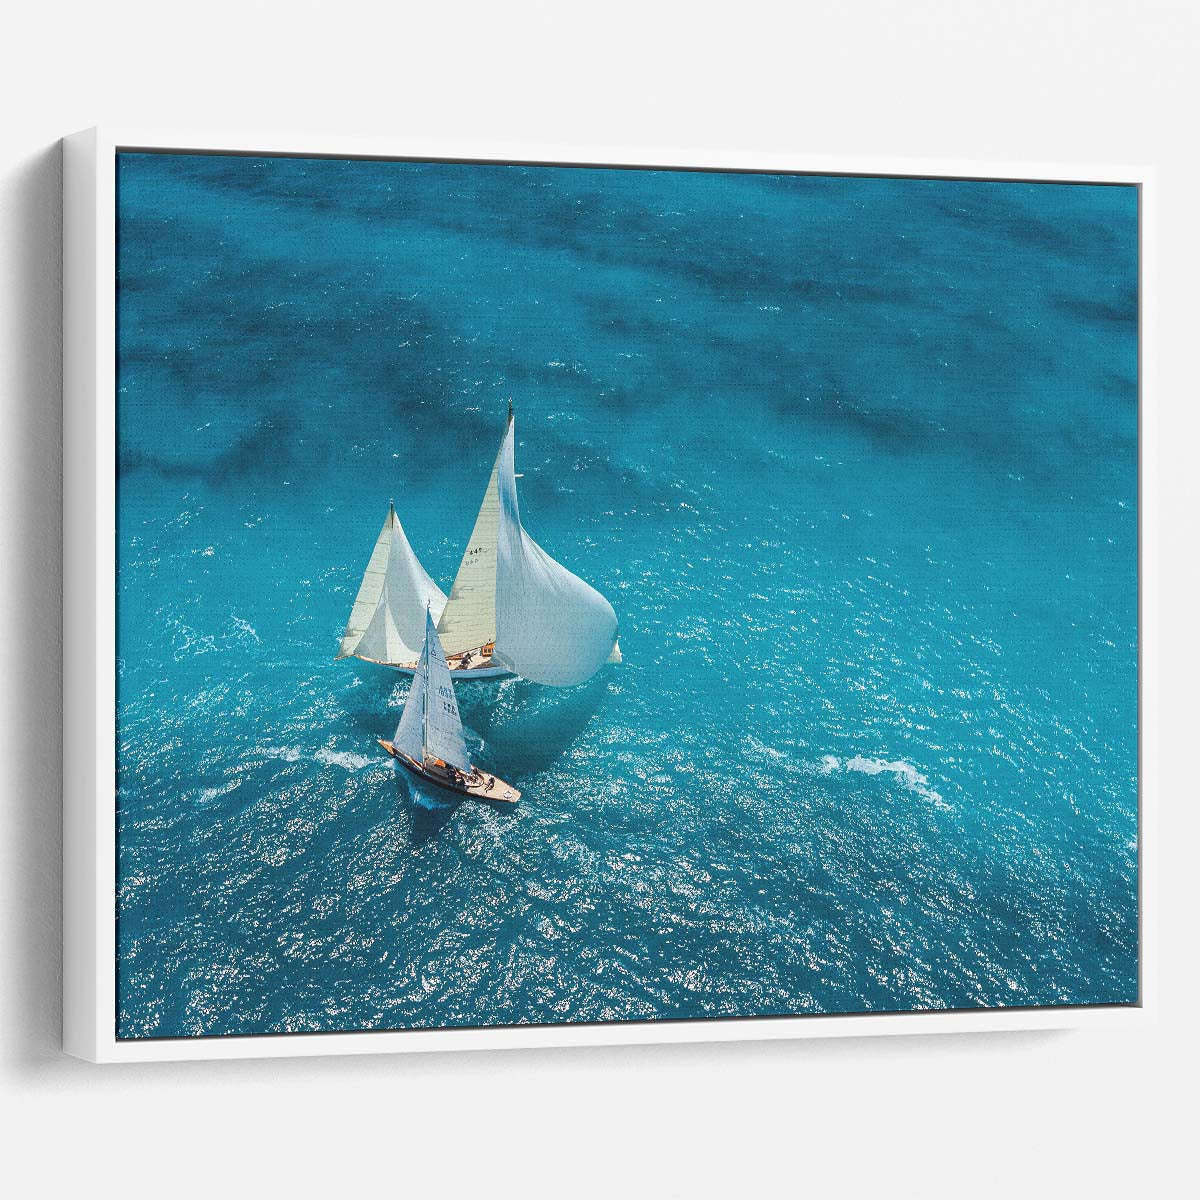 Aerial Maritime Race Adventure Seascape Wall Art by Luxuriance Designs. Made in USA.